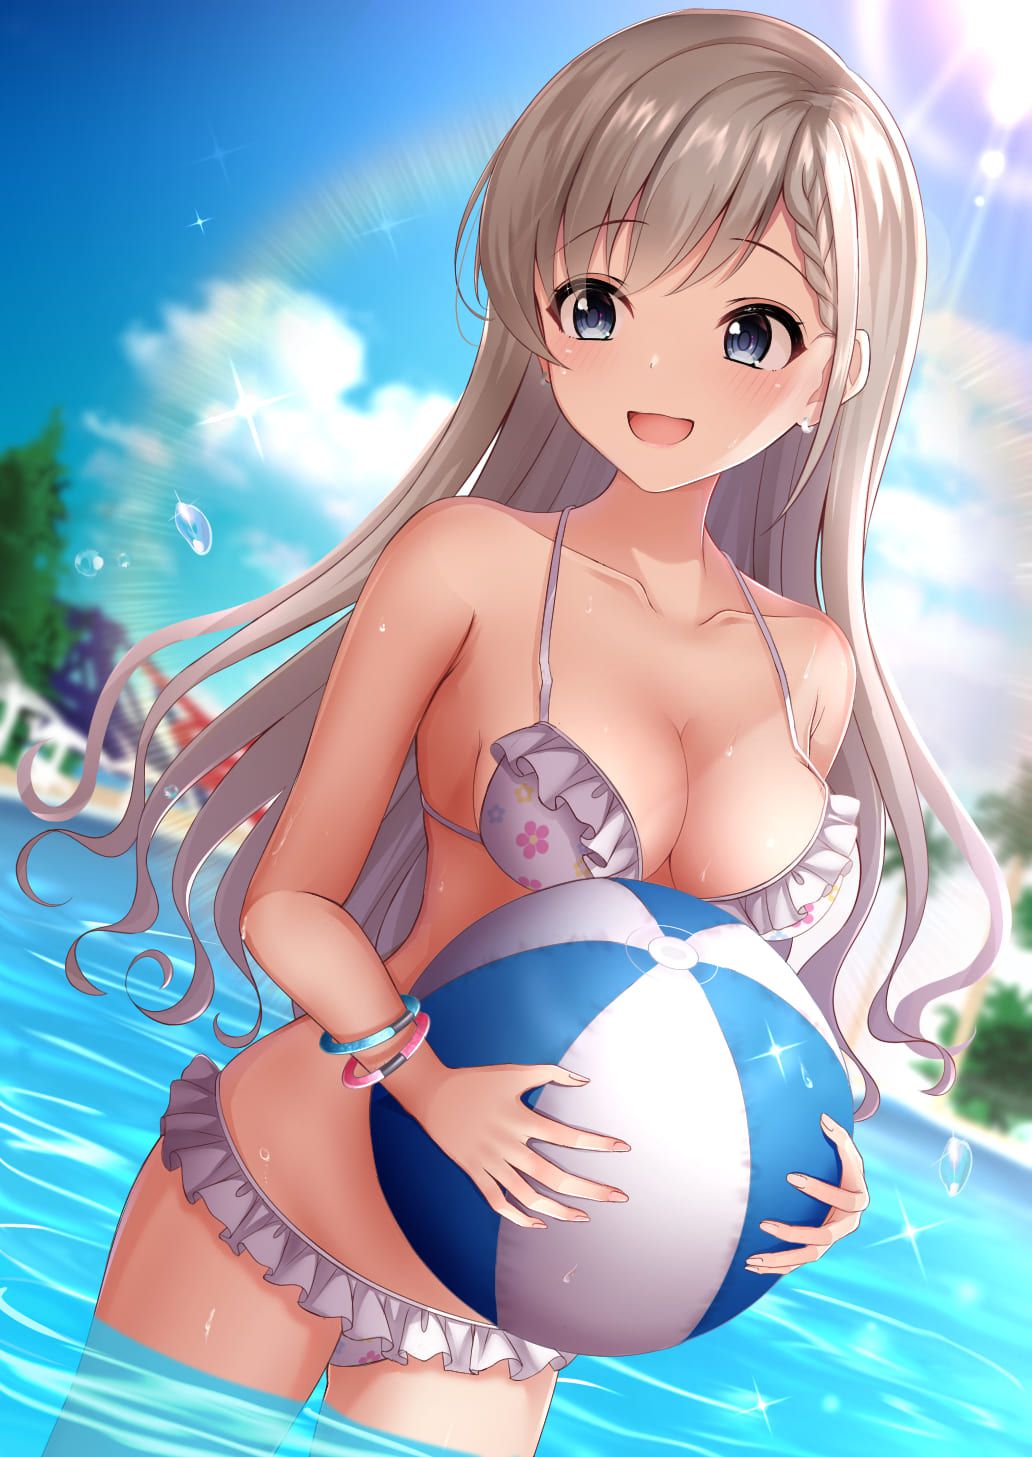 【Secondary】Moe and erotic images of cute girls in swimsuits 22